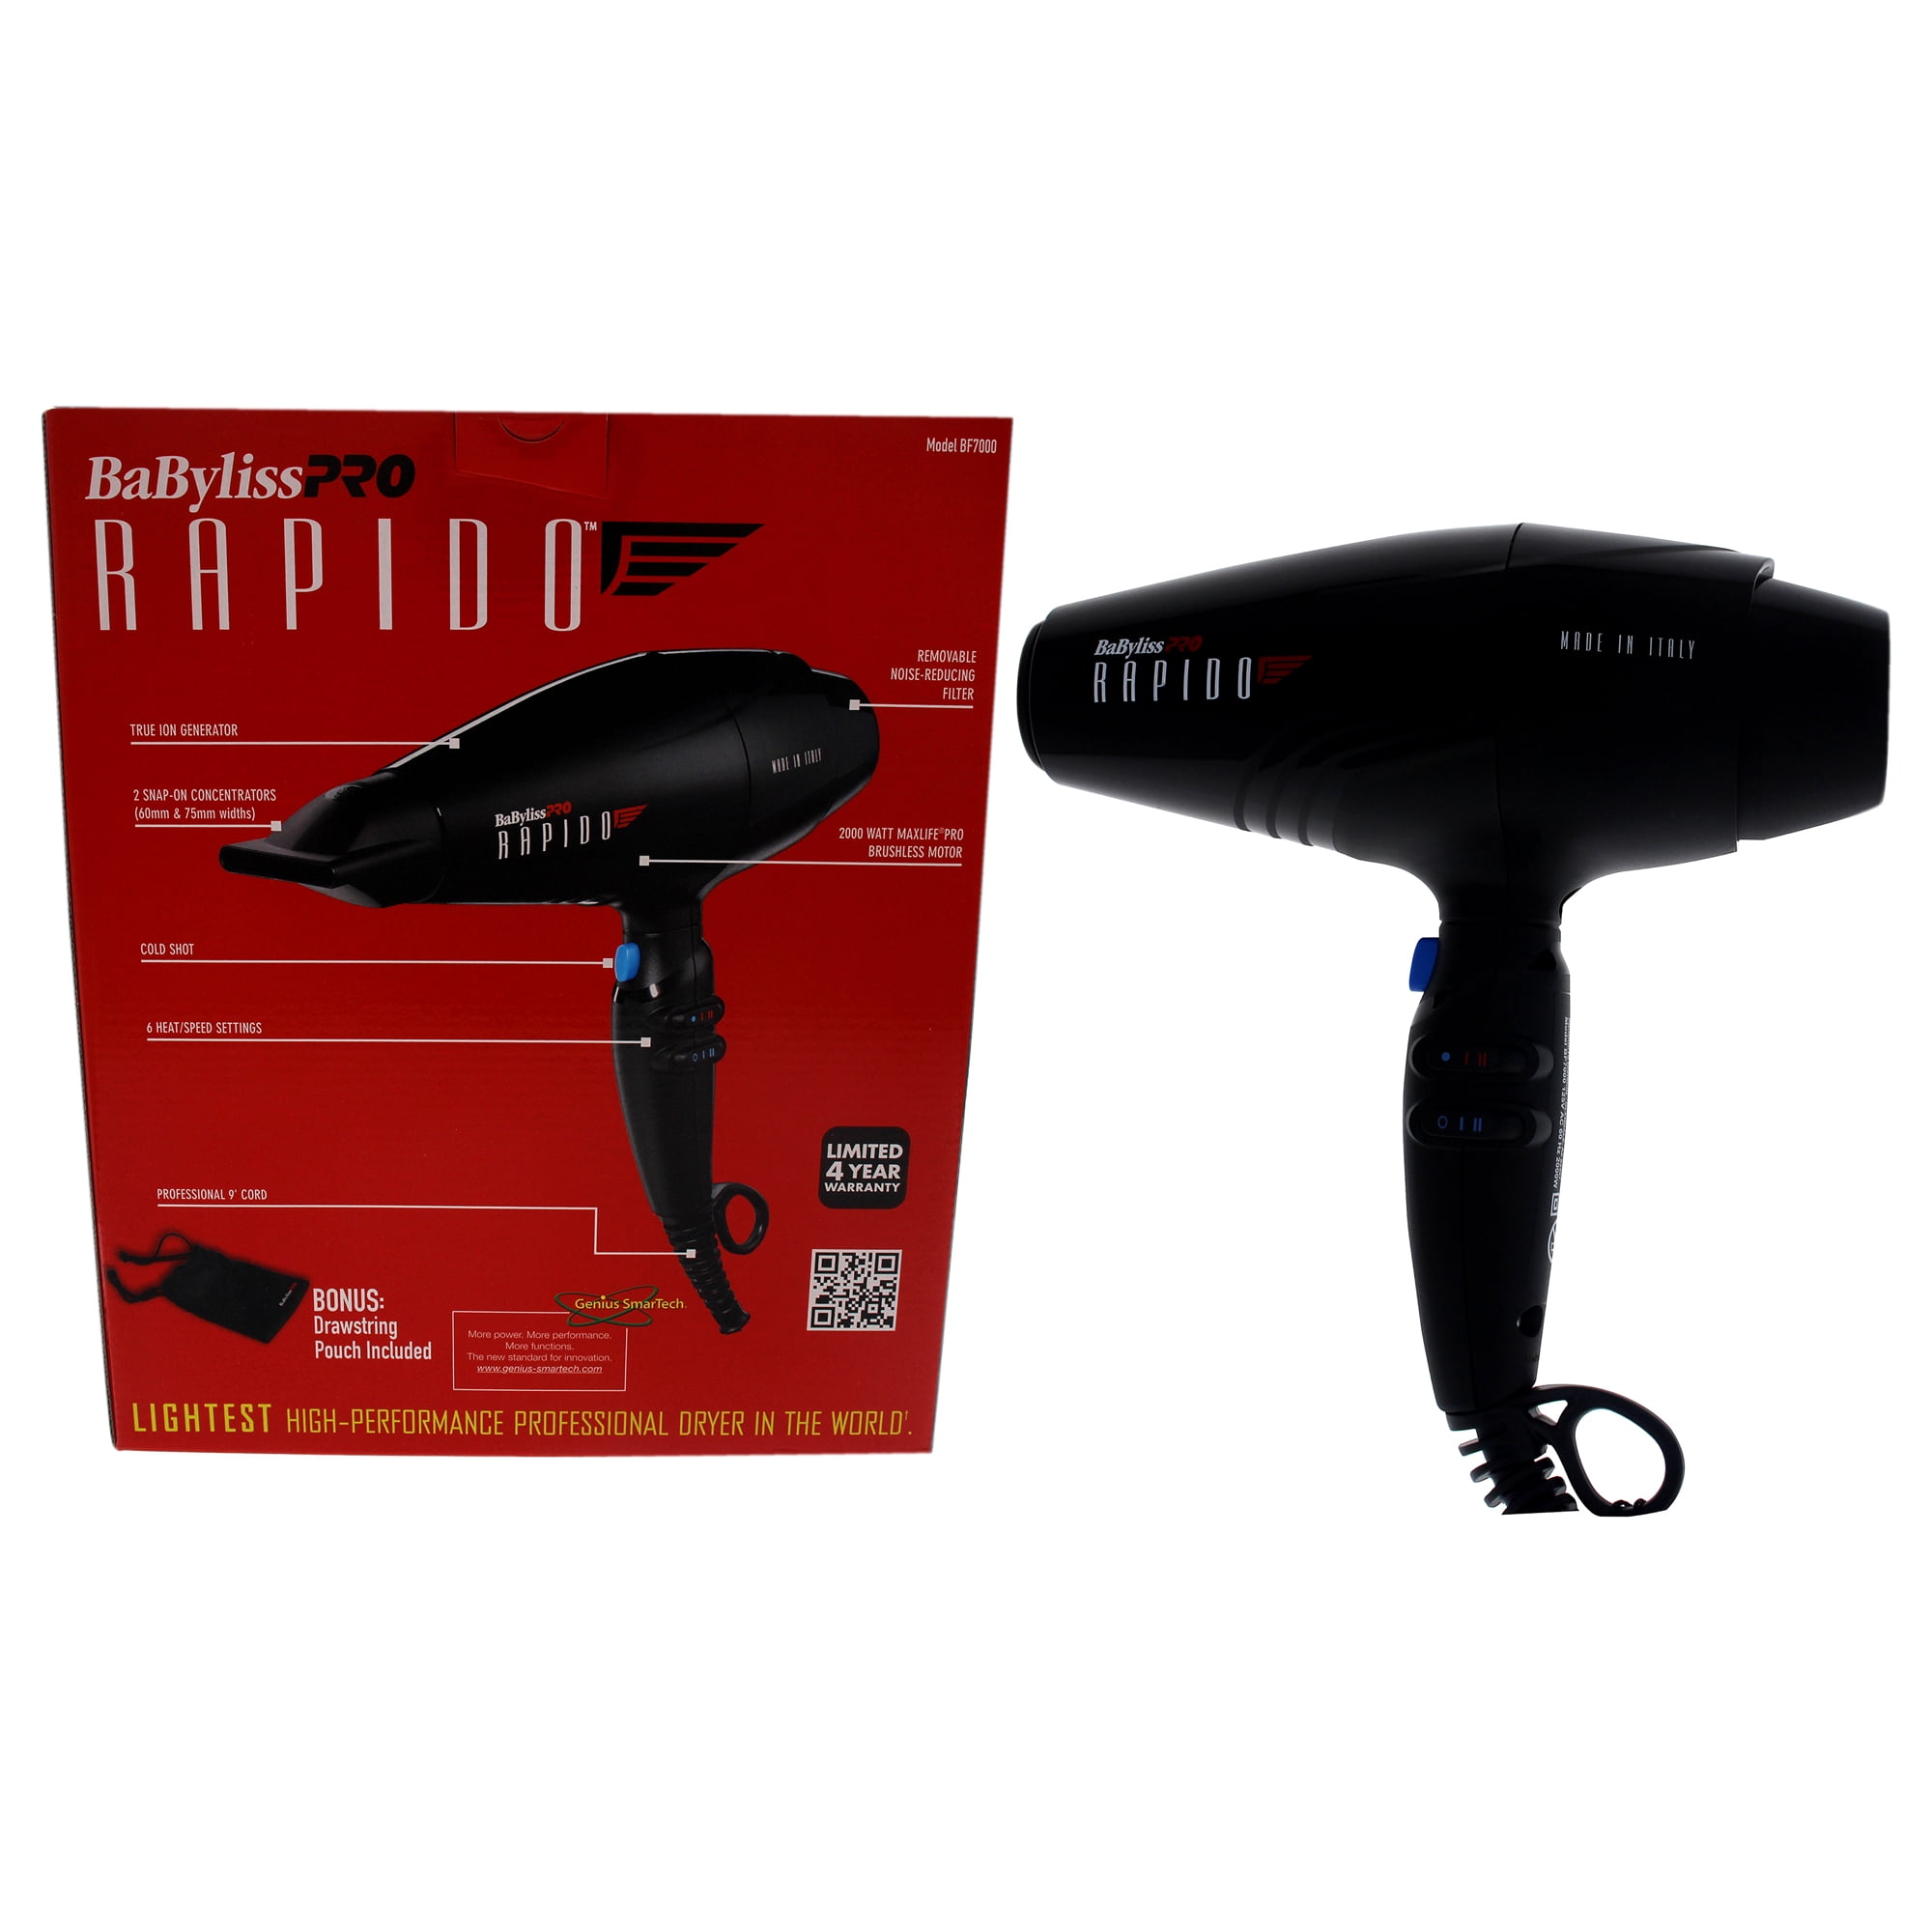 Buy BaBylissPRO Ferrari Rapido Hair Dryer 2000 Watts +Travel Pouch Online  at Lowest Price in Ubuy Hong Kong. 226801148